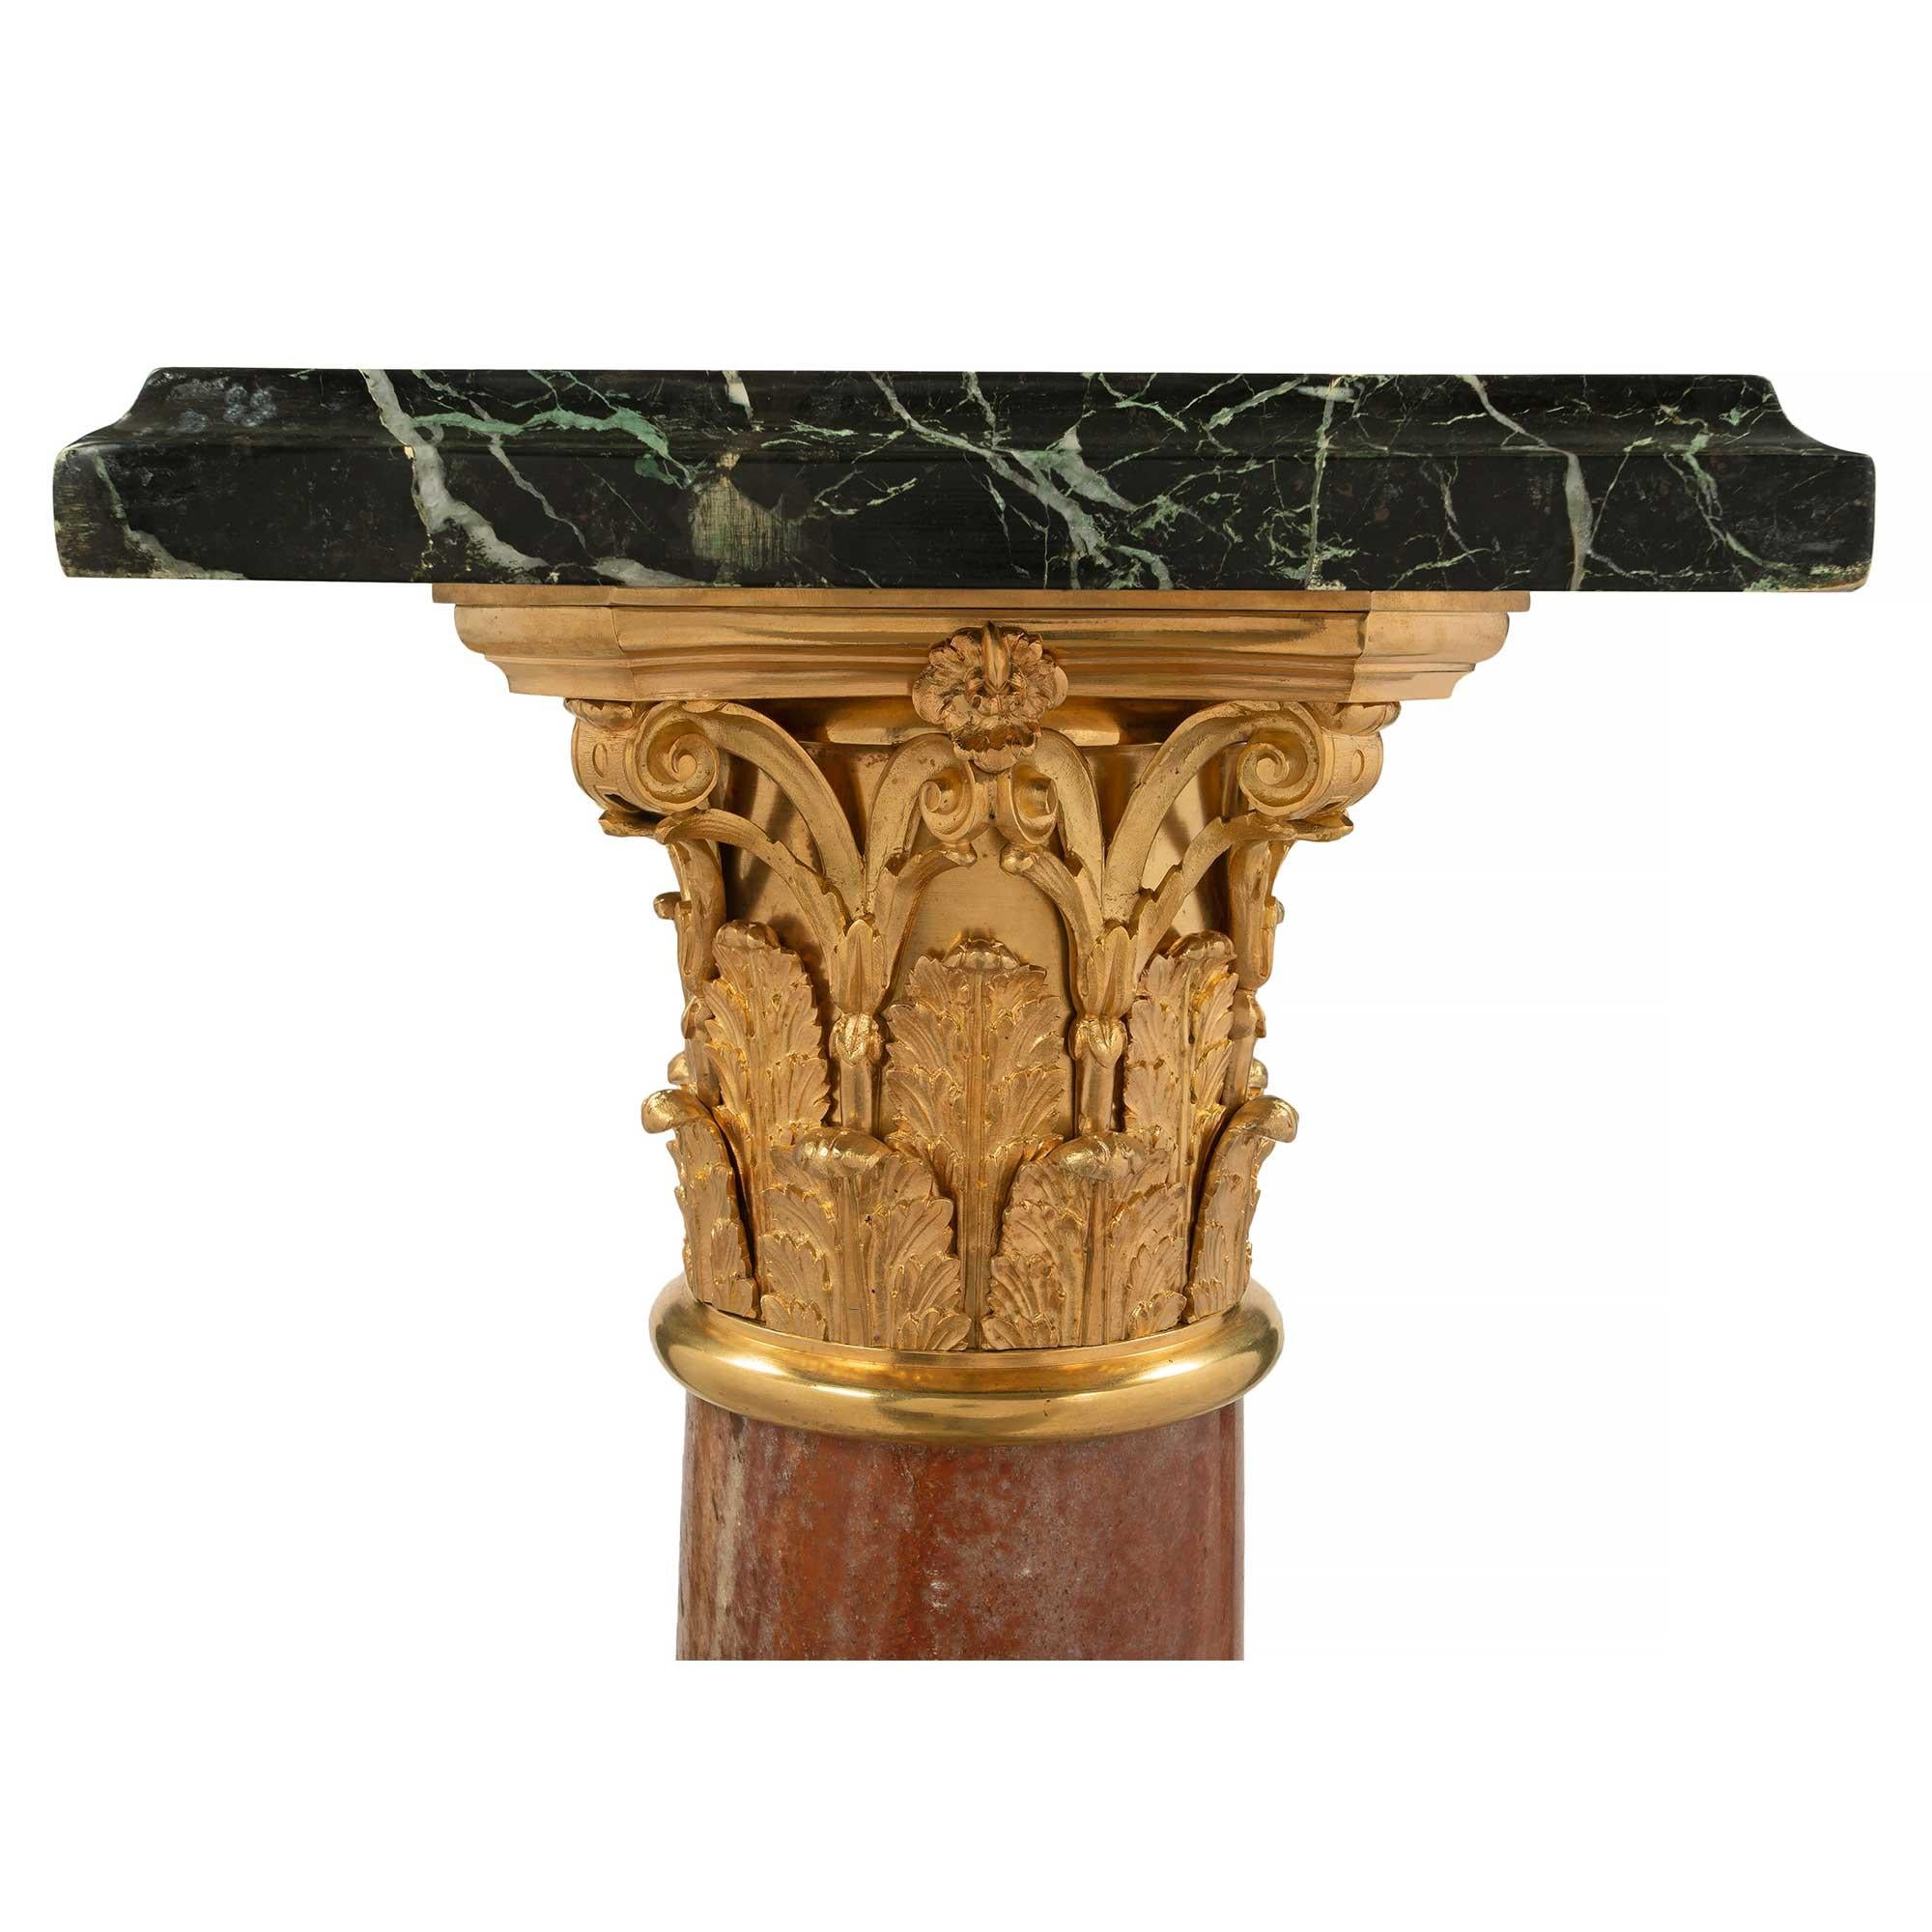 French Mid-19th Century Louis XVI Style Pedestal Column in Marble and Ormolu For Sale 2